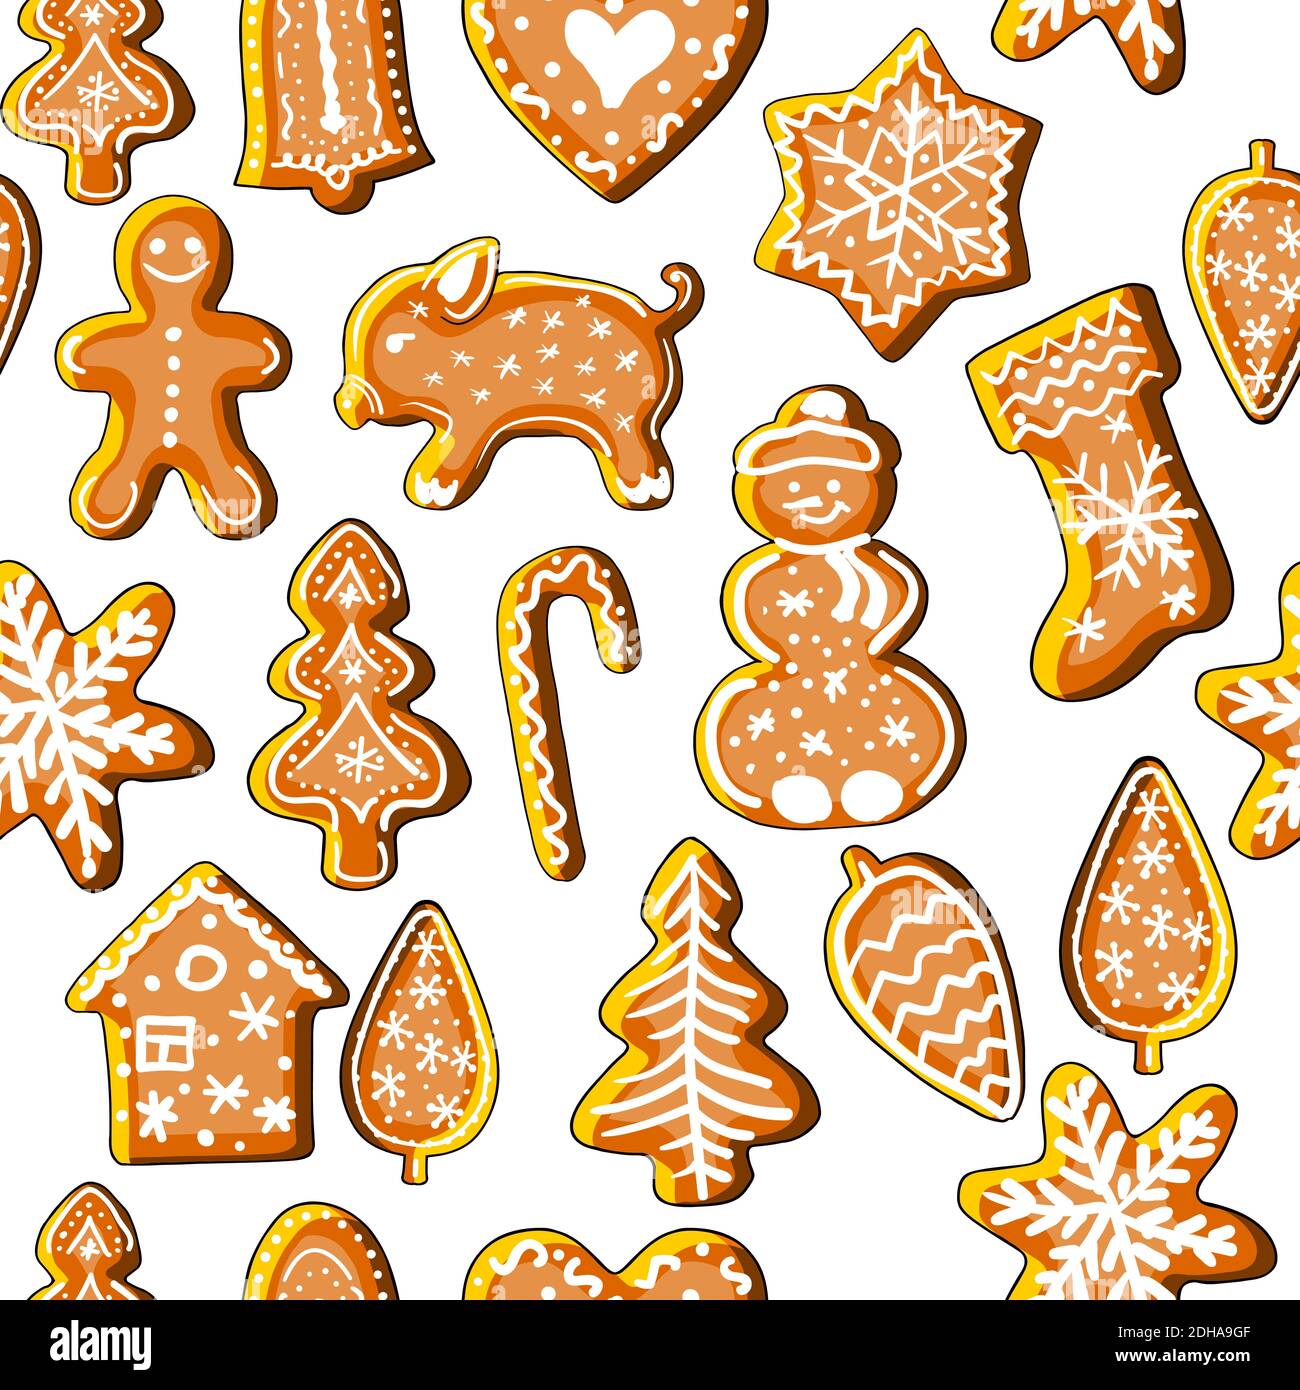 Endless texture with traditional Christmas symbols. Seamless vector pattern for your festive design, fabrics, wallpapers, greeting cards, wrappings.wr Stock Vector